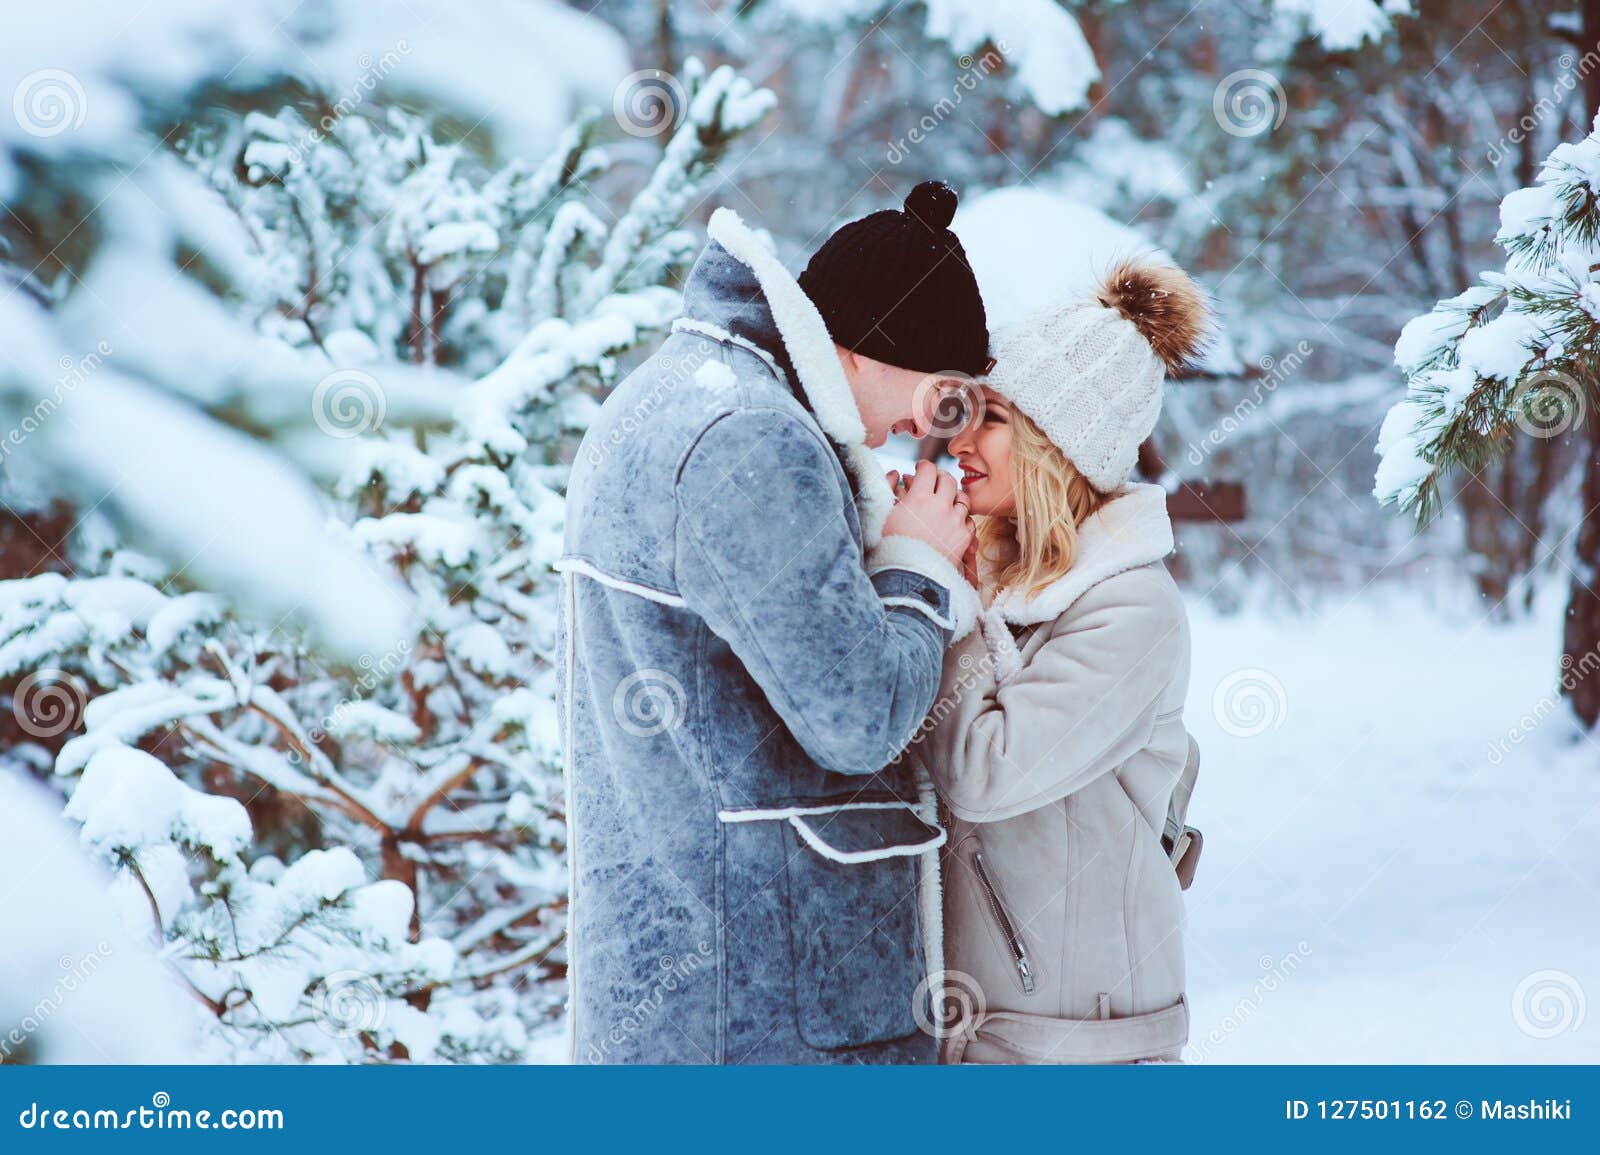 Winter Portrait Of Happy Romantic Couple Warm Up Each Other On The Walk